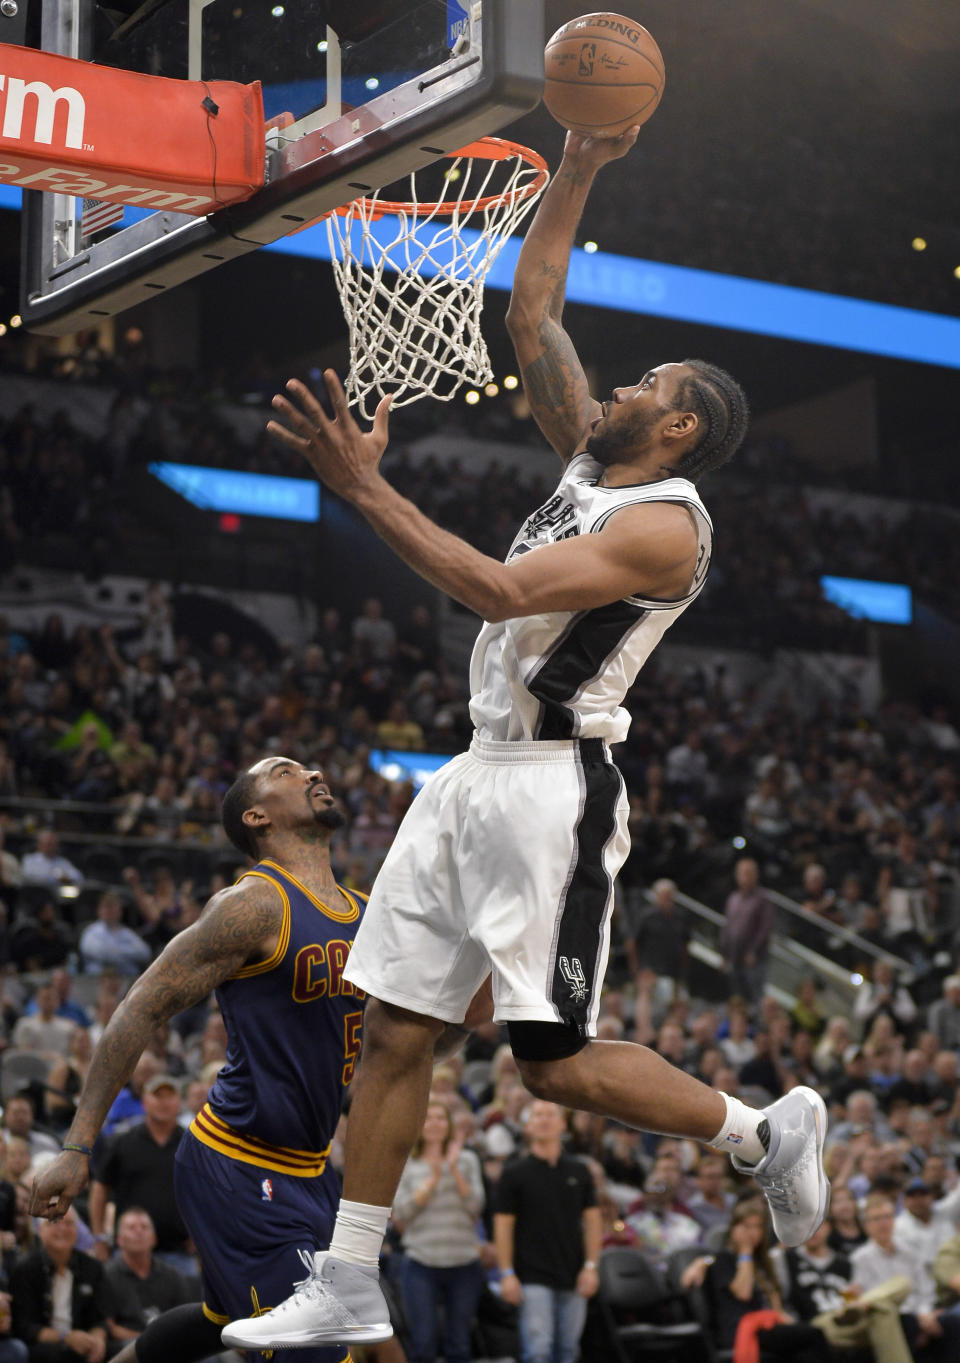 San Antonio Spurs forward Kawhi Leonard dunks during the second half of an NBA basketball game against the Cleveland Cavaliers, Monday, March 27, 2017, in San Antonio. (AP Photo/Darren Abate)